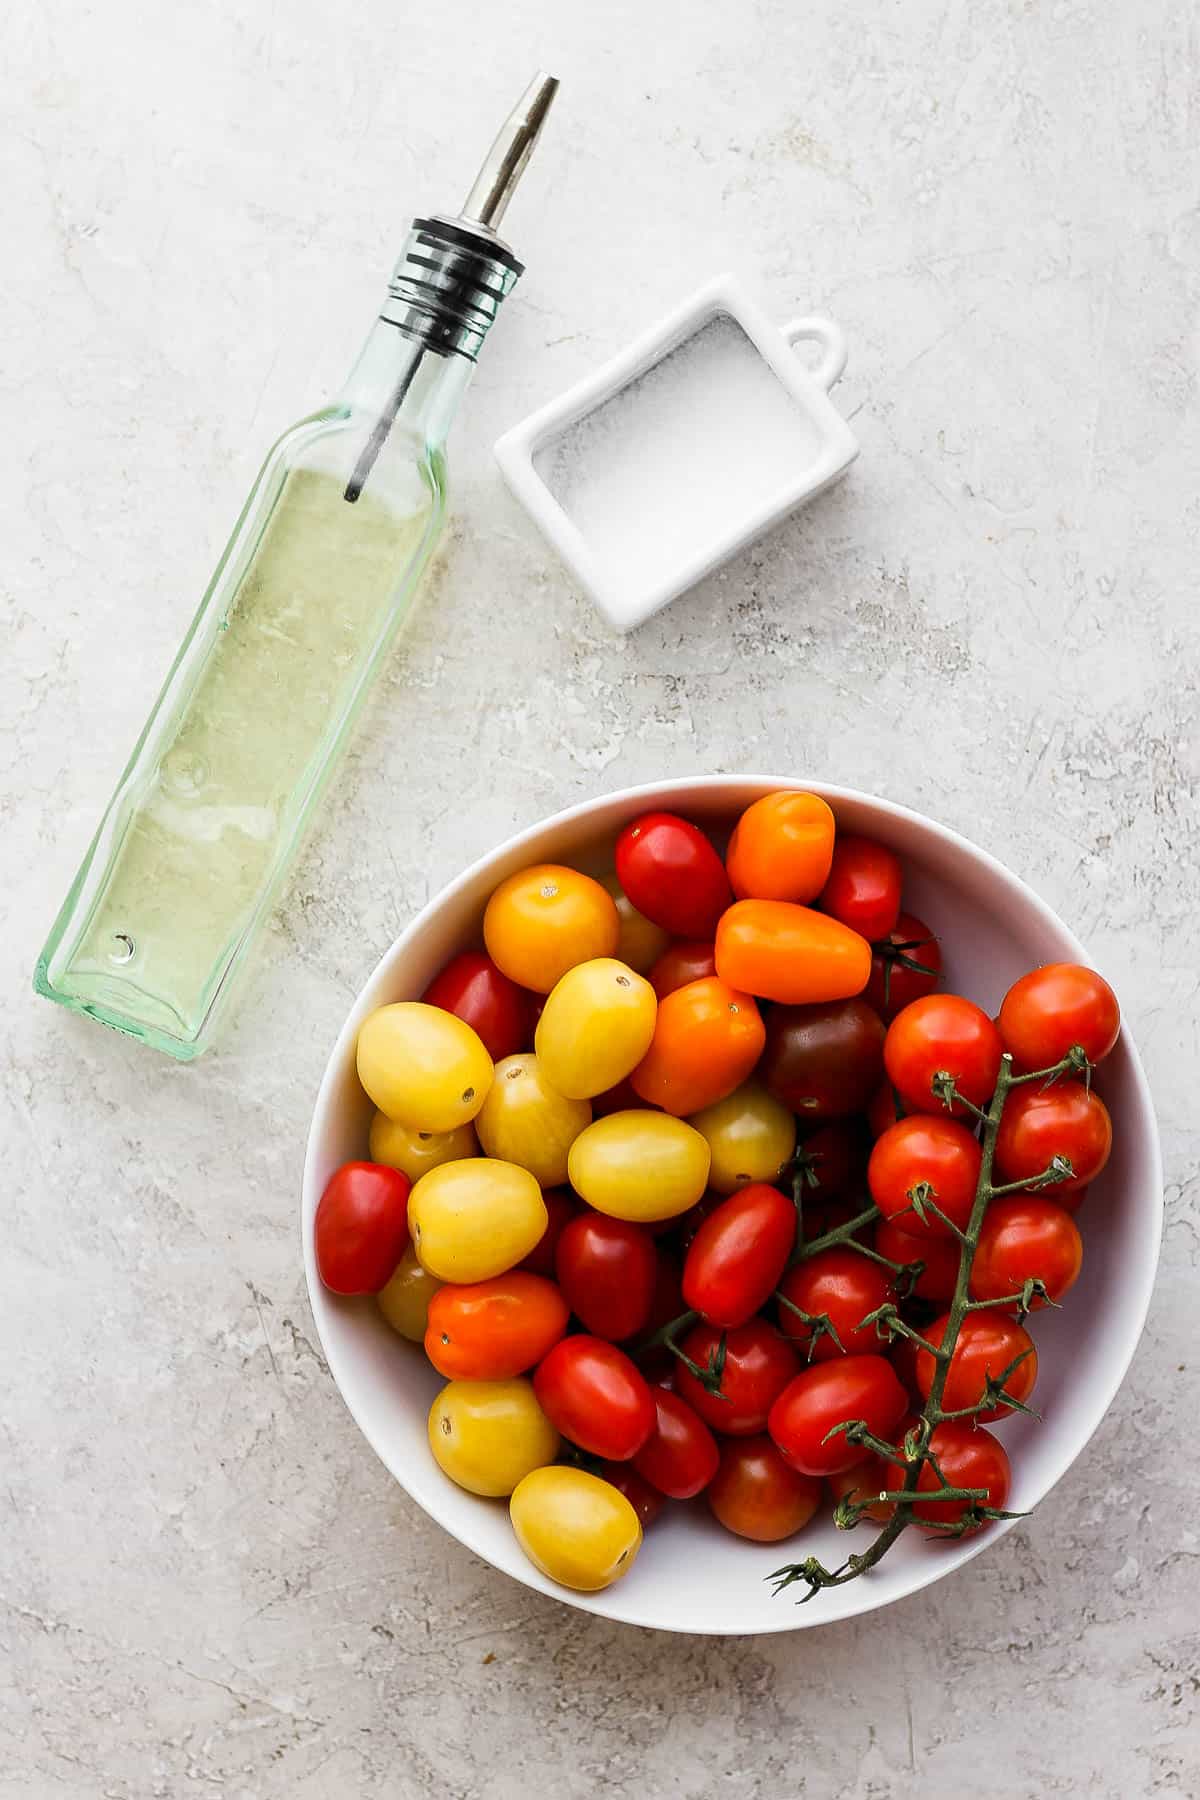 A bowl of cherry tomatoes, a container of salt, and a container of olive oil on a counter.